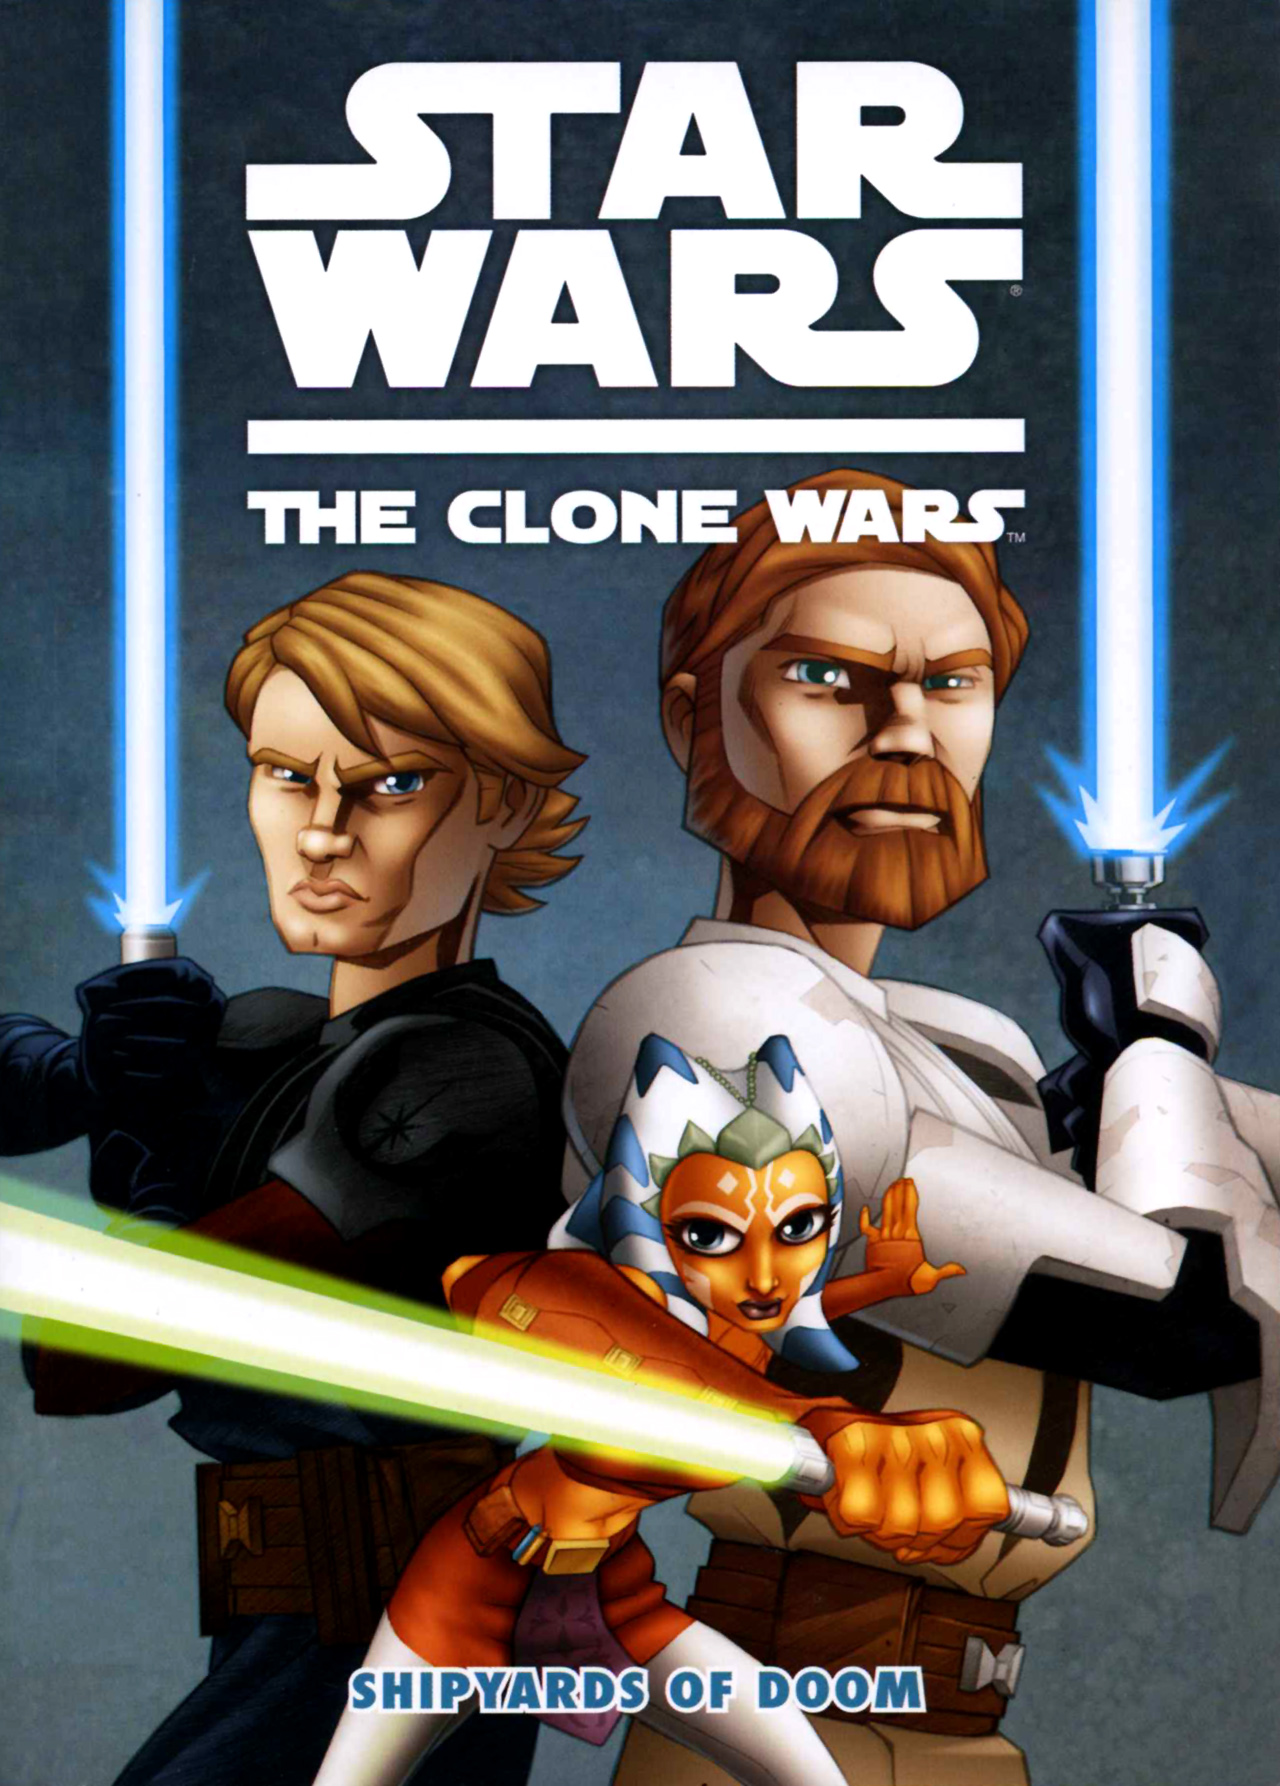 Read online Star Wars: The Clone Wars - Shipyards of Doom comic -  Issue # Full - 1